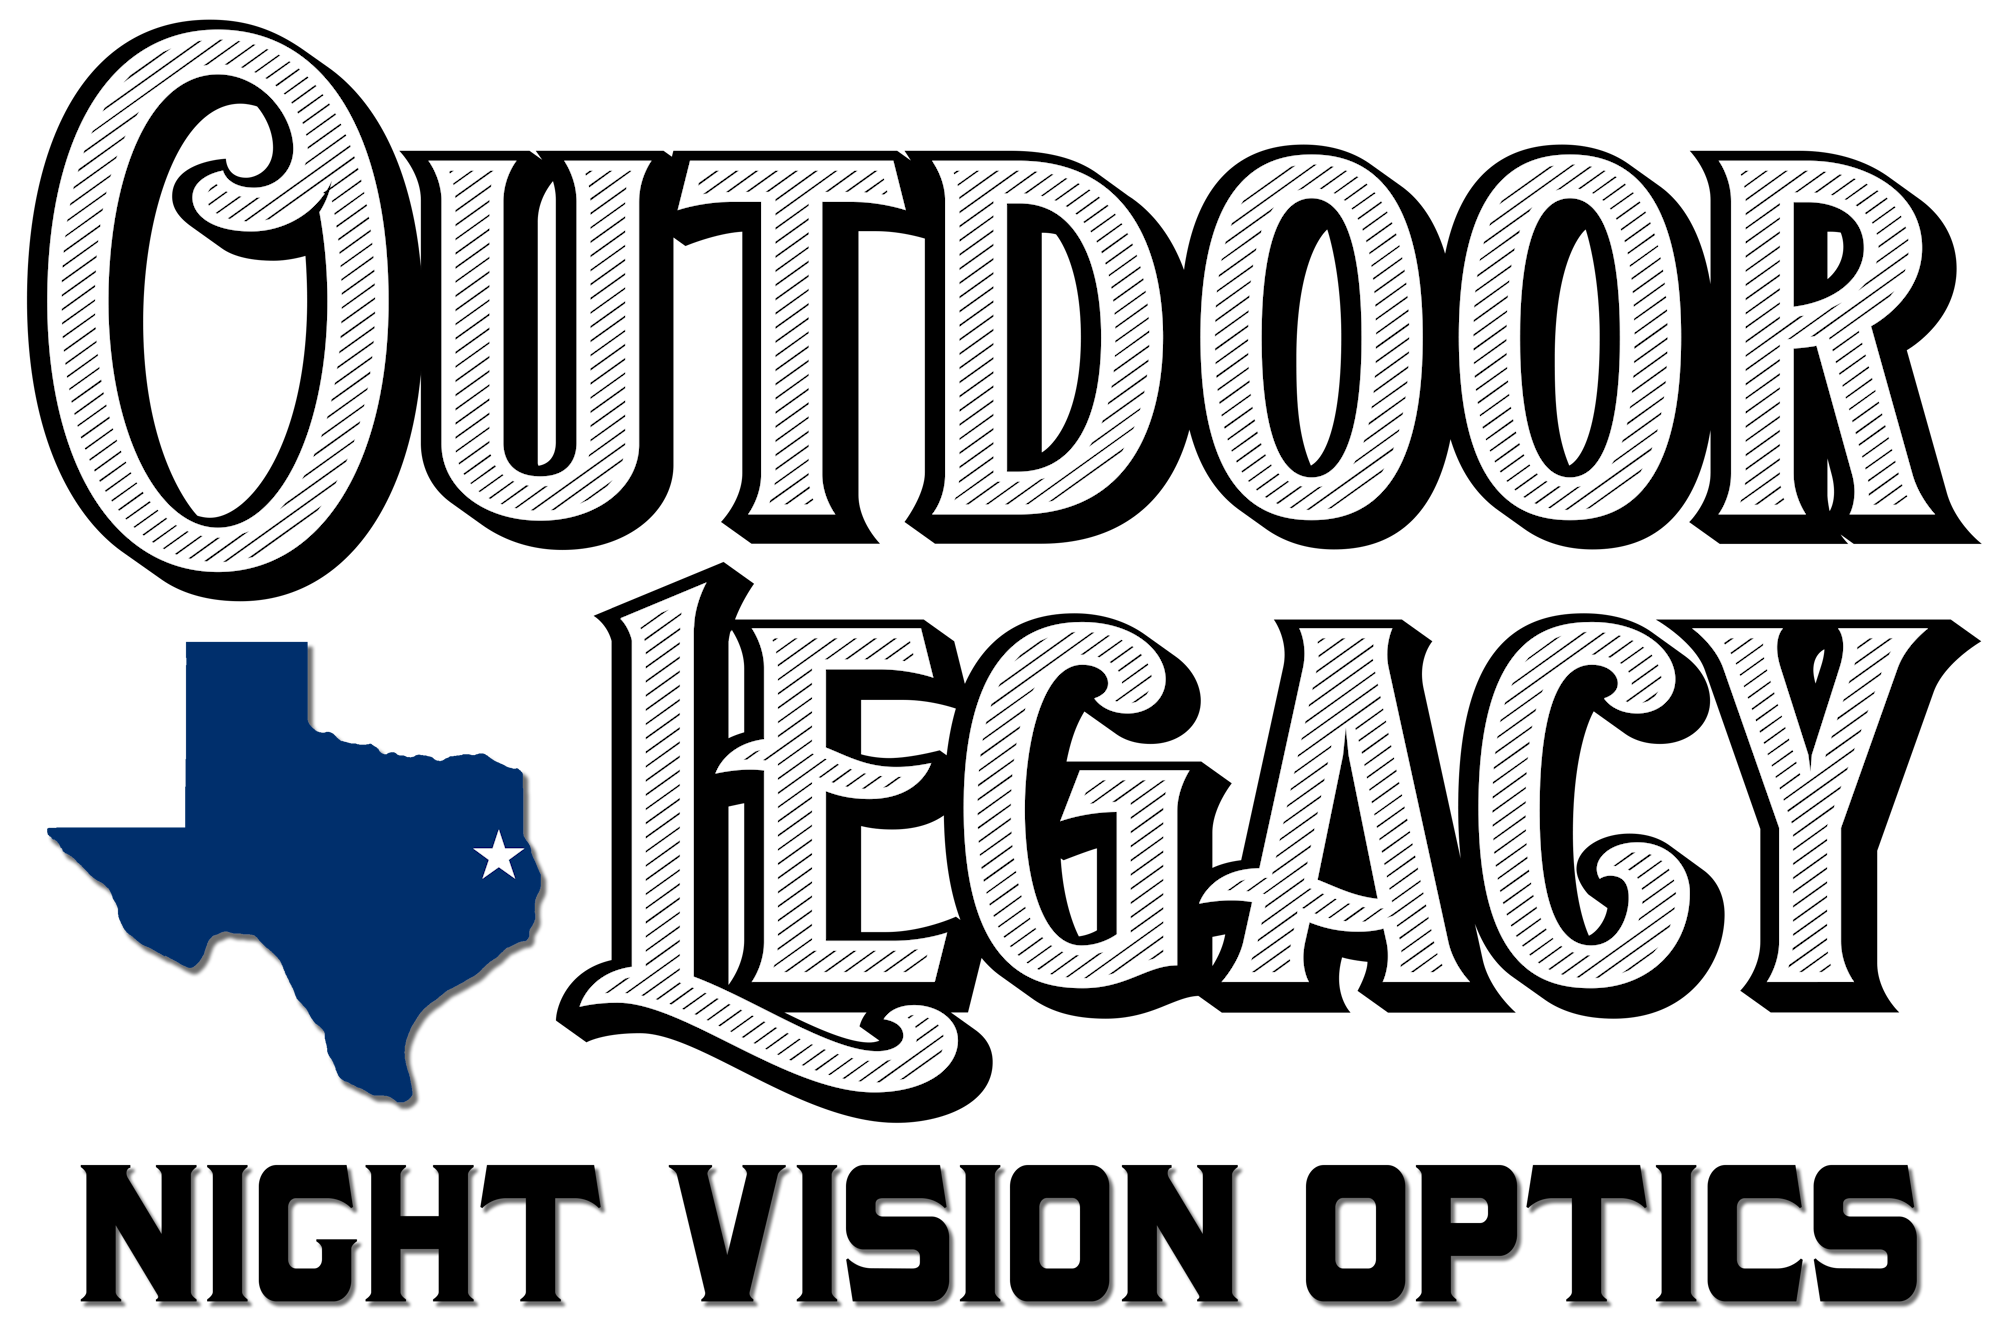 Outdoor Legacy